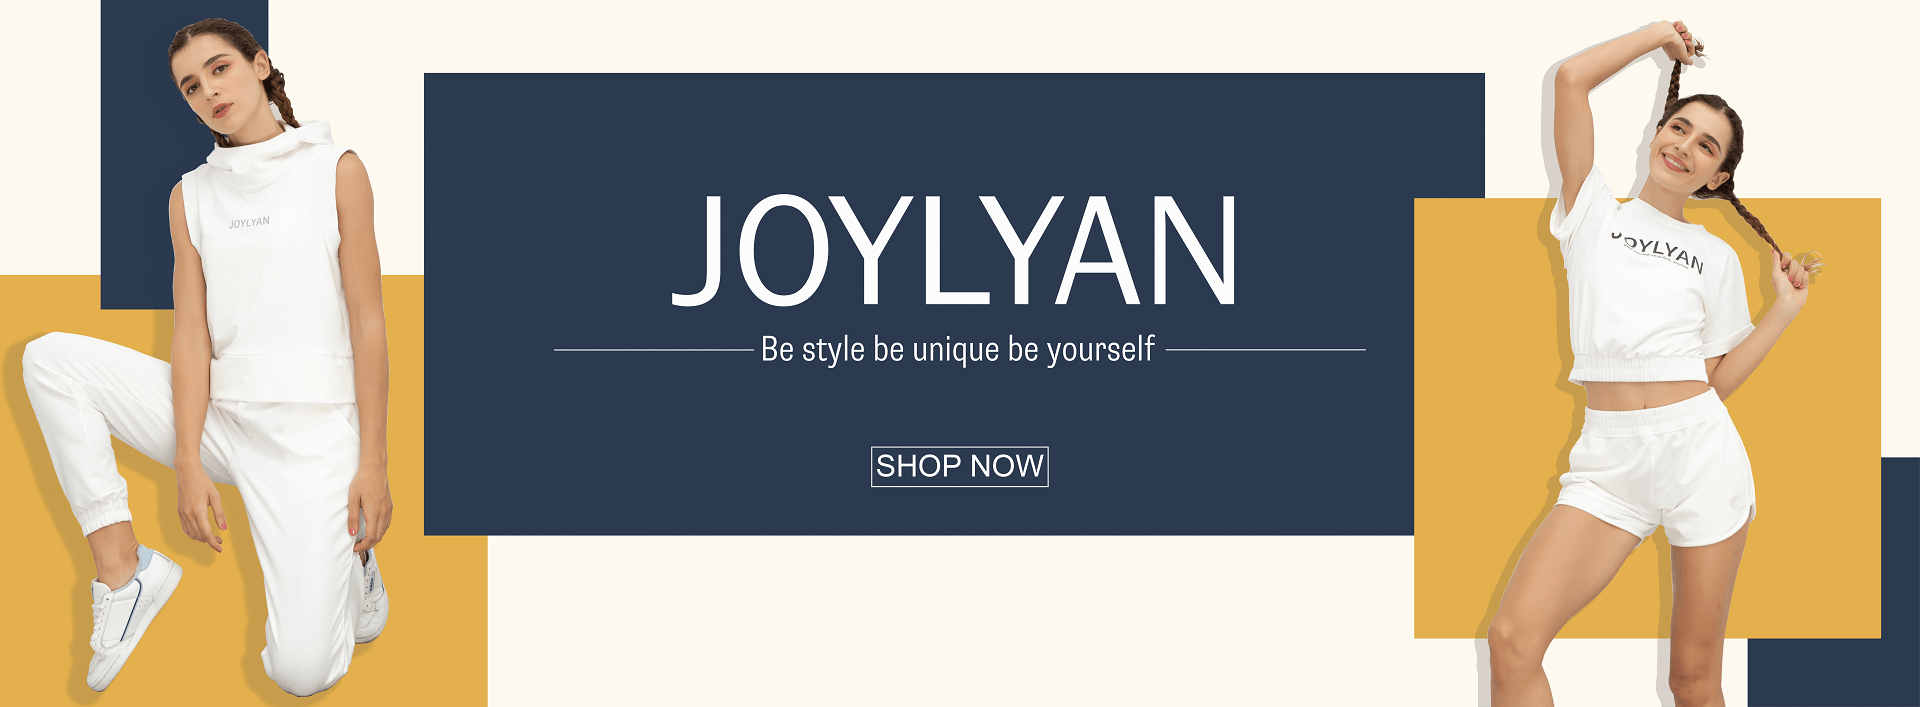 Joylyan Wear Yoga Clothes Swimwear And Casual Clothes For Studio To Street